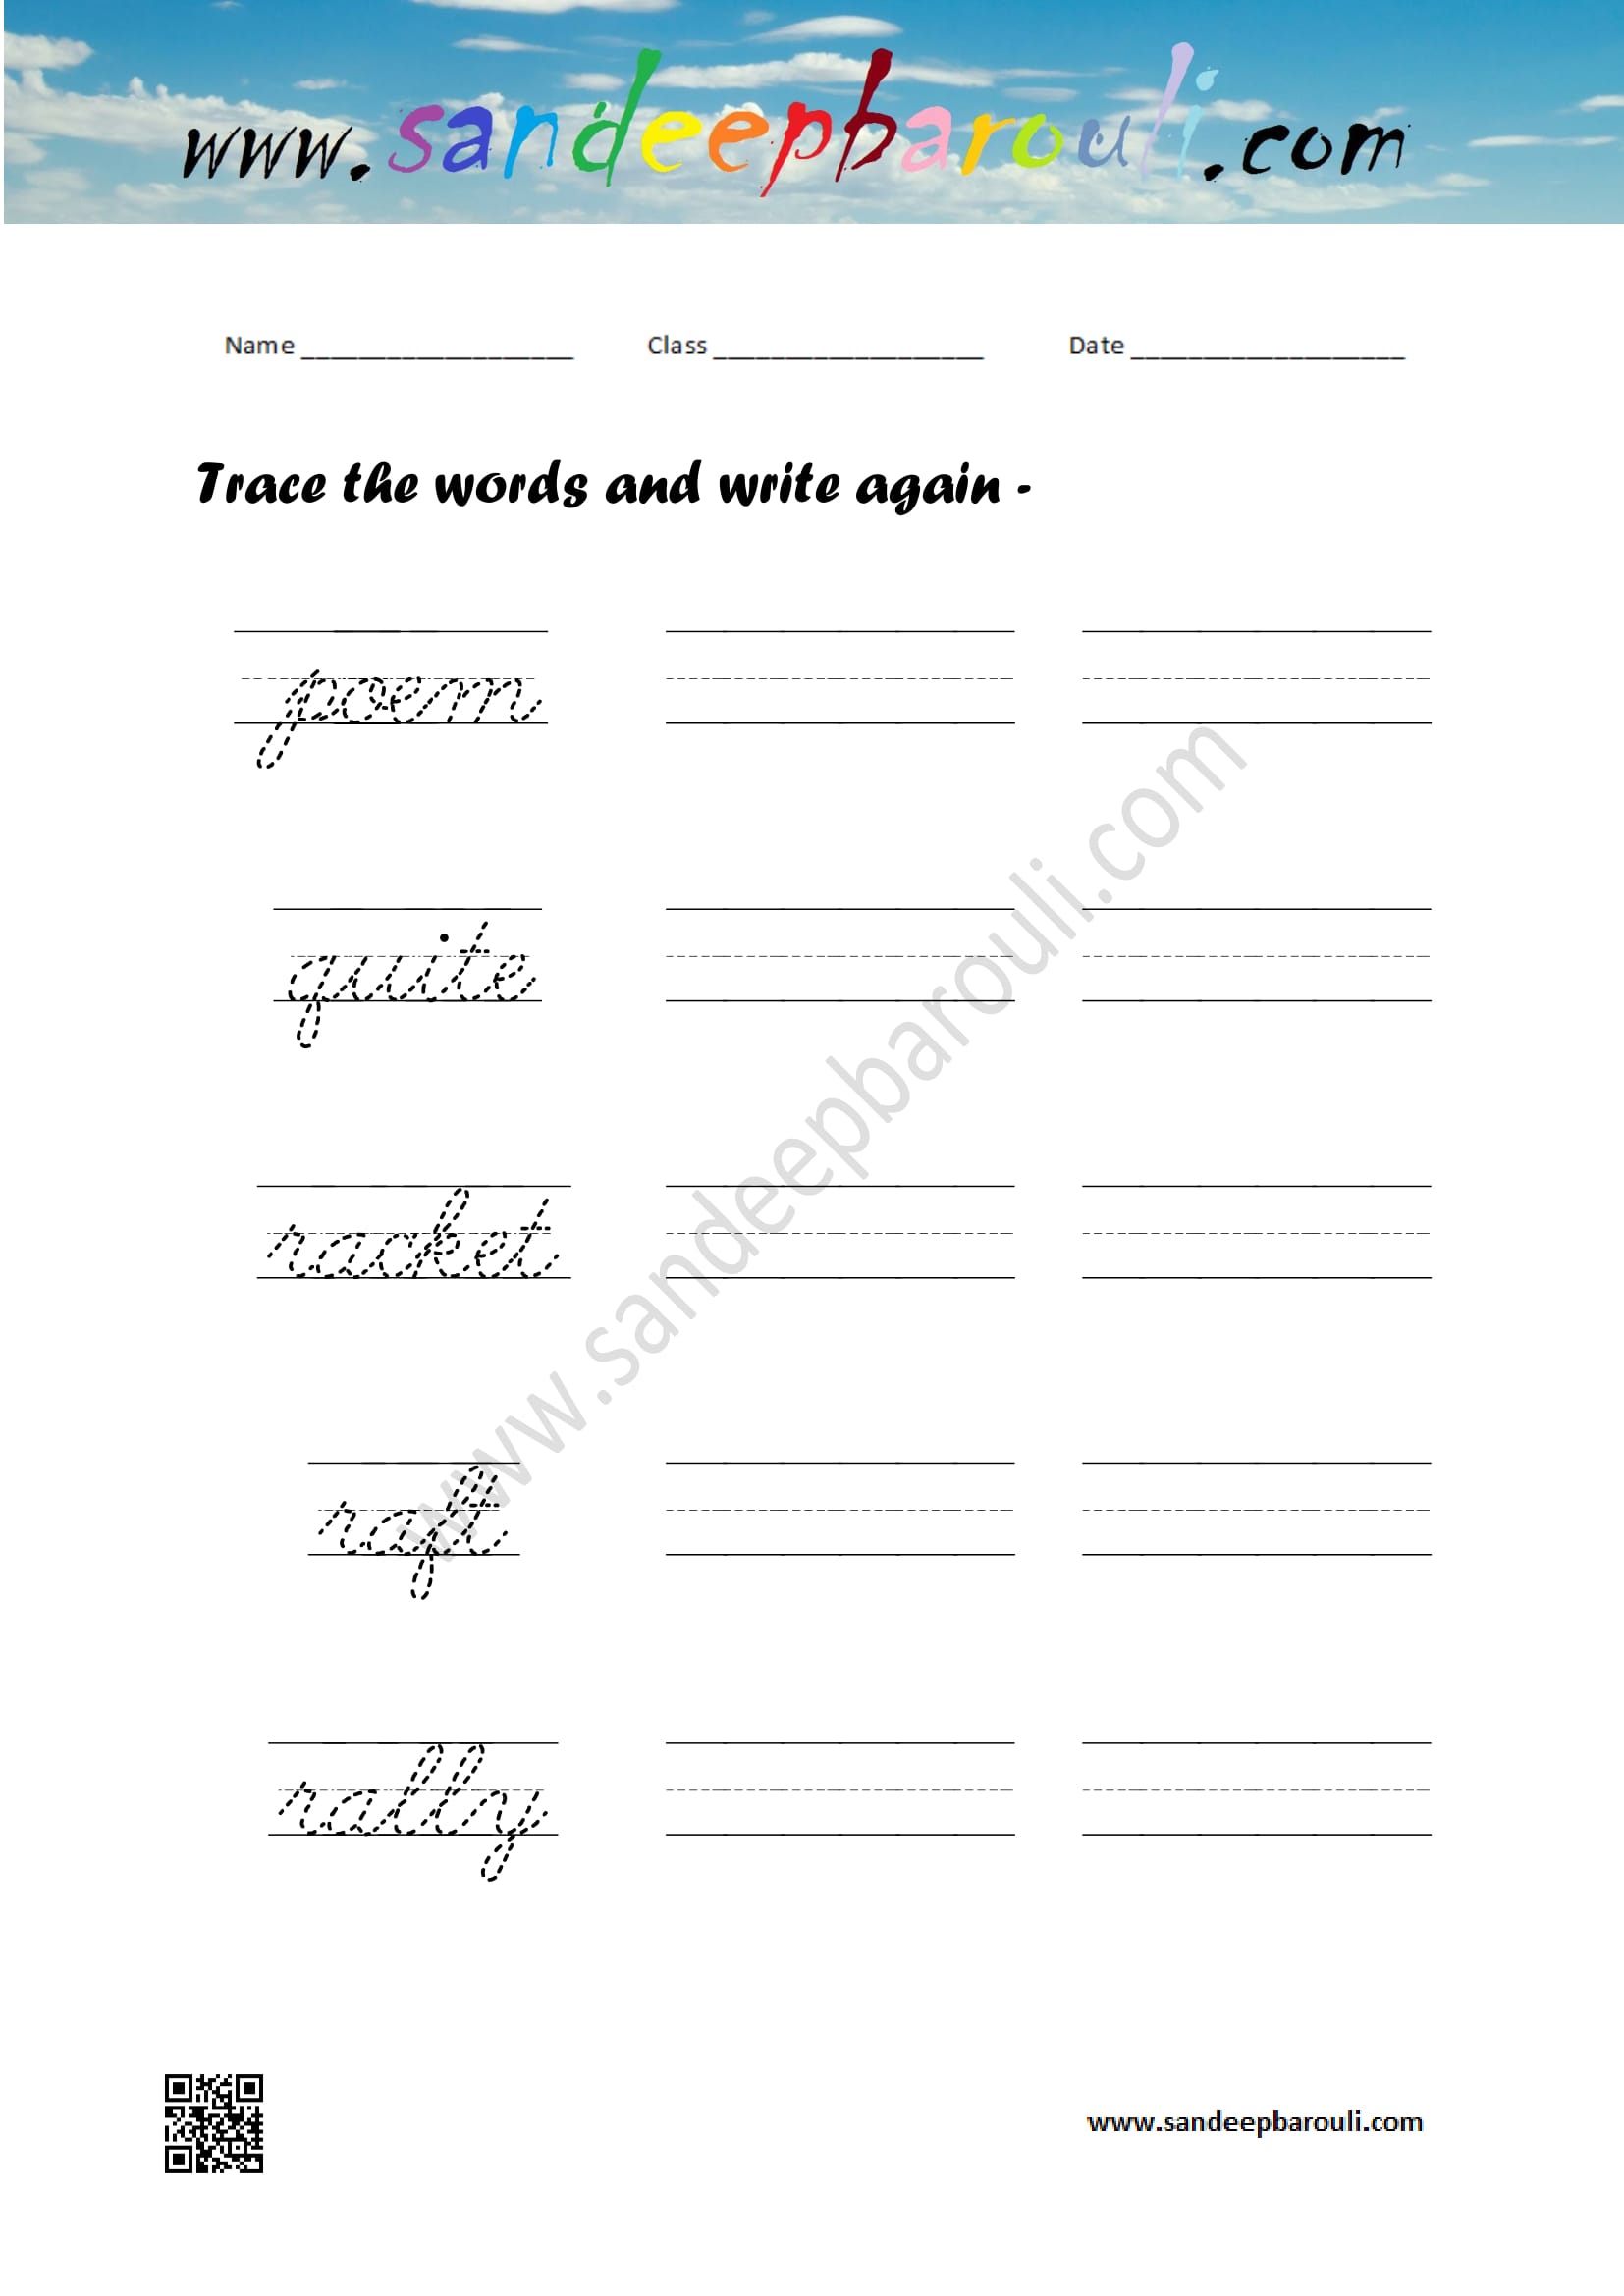 Cursive writing worksheet – trace the words and write again (53)